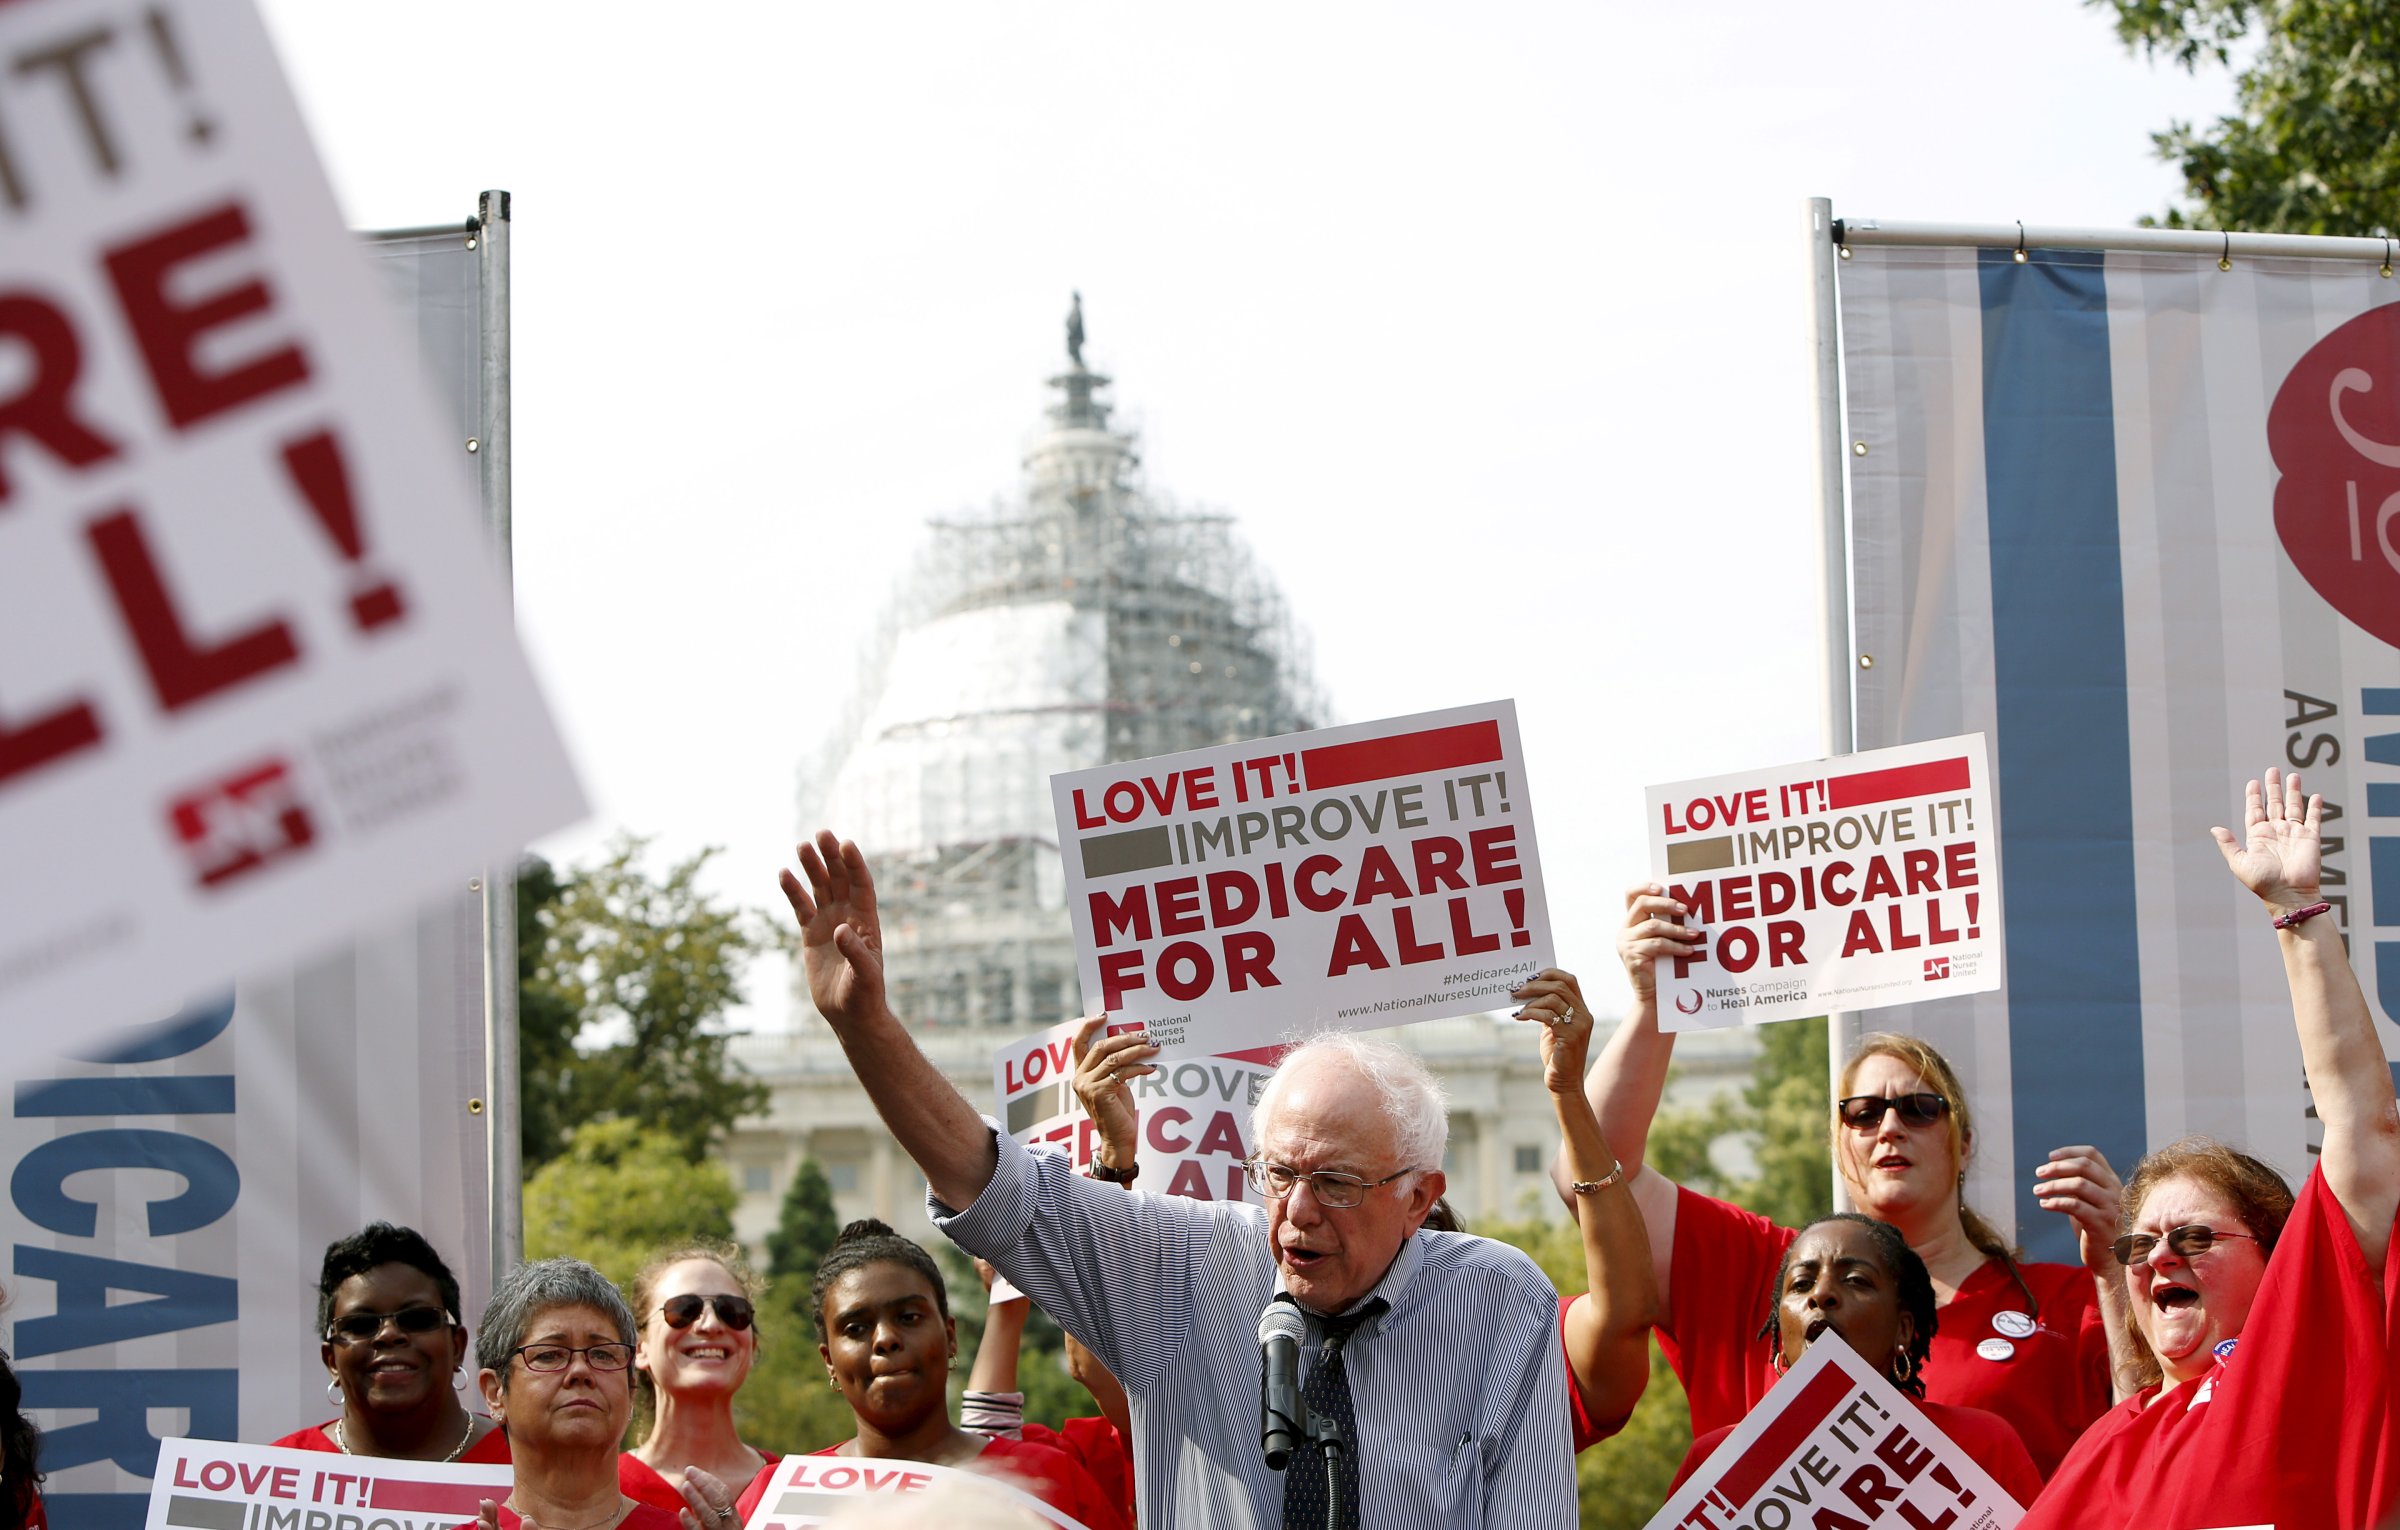 Democratic presidential candidate Bernie Sanders delivers remarks at a National Nurses United event to honor Medicare and Medicaid's 50th anniversary on Capitol Hill in Washington on July 30, 2015.